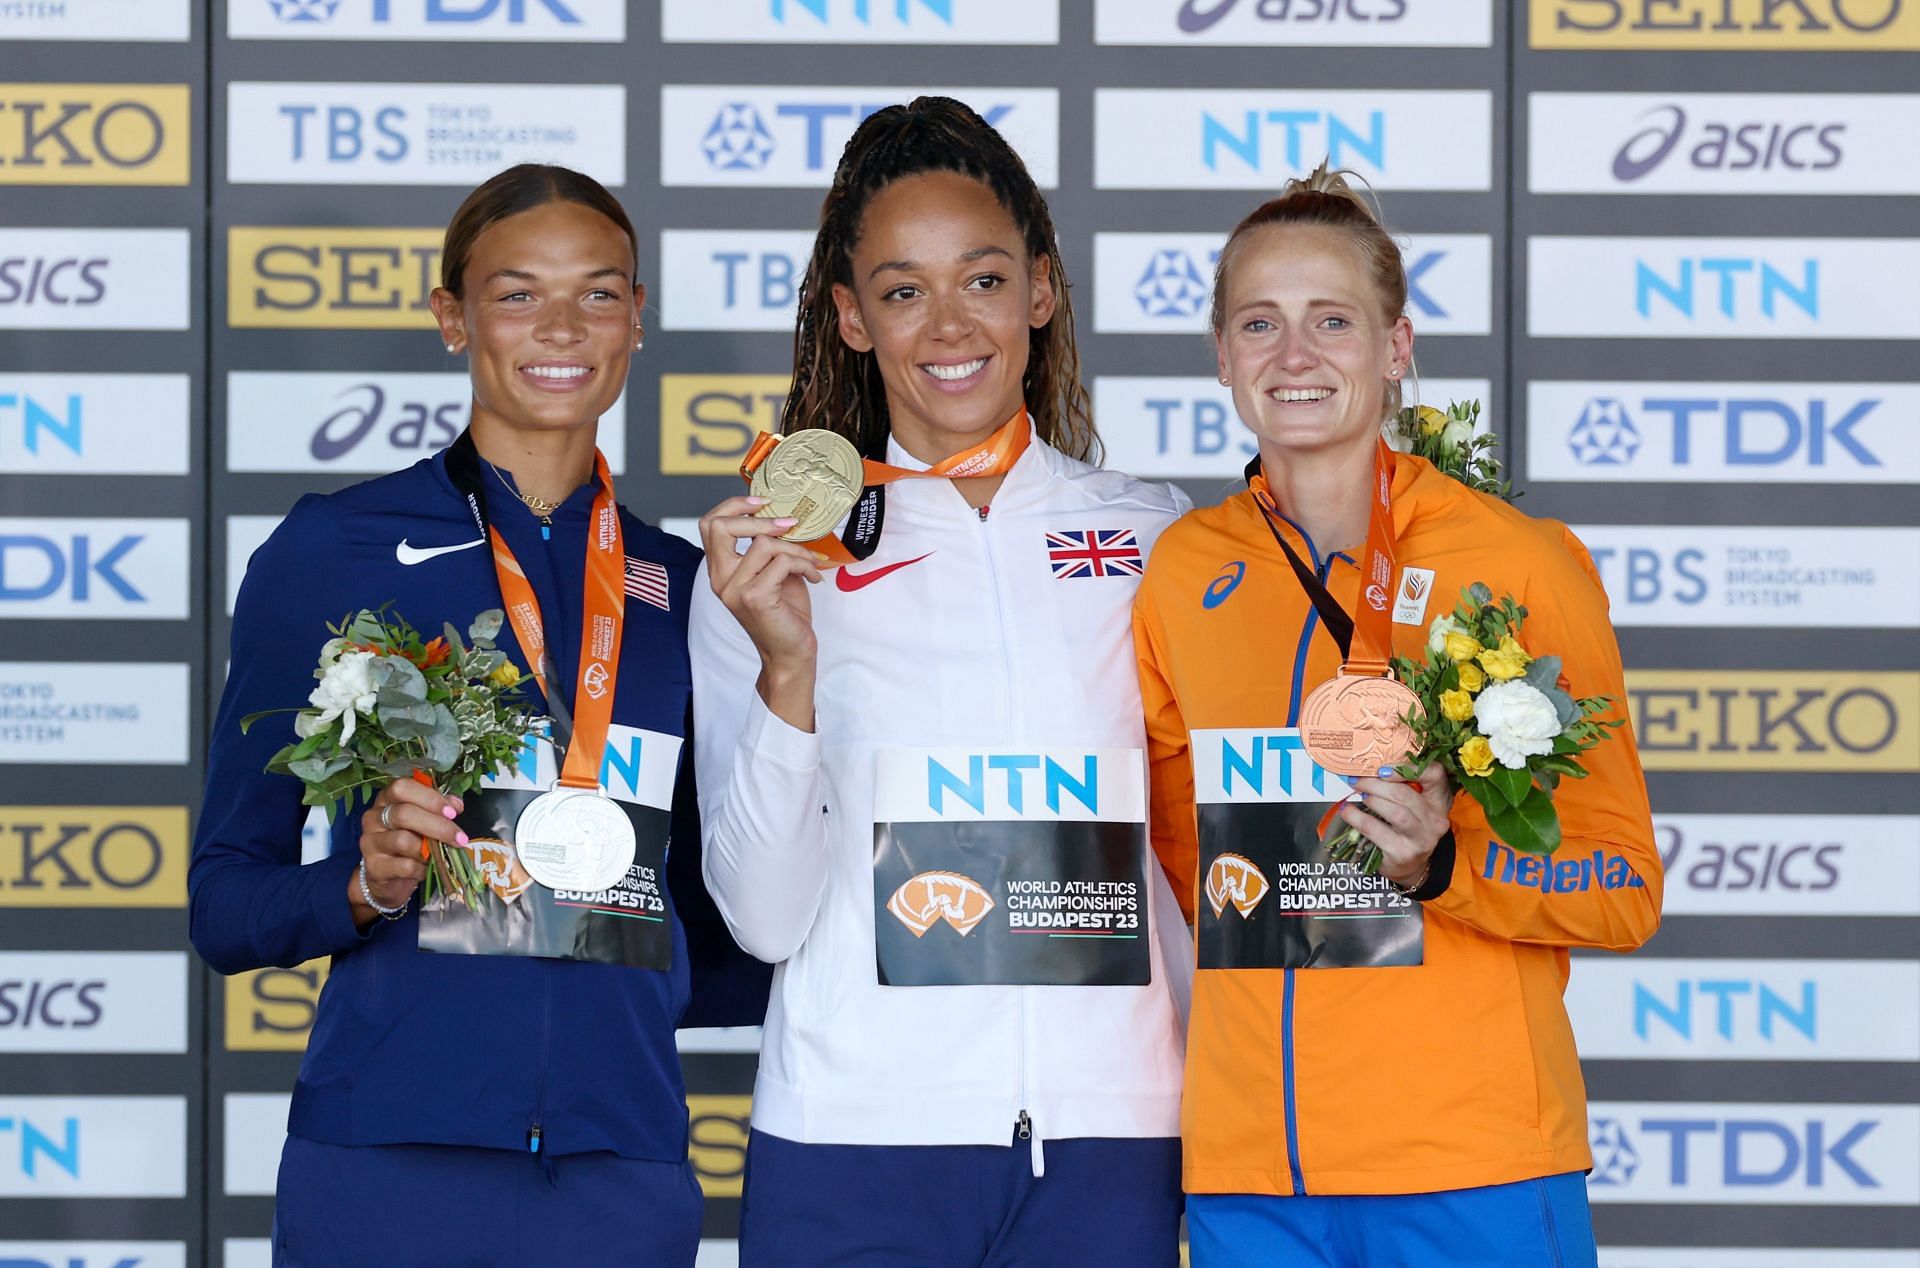 Anna Hall (left), Katarina Johnson-Thompson (middle), and Anouk Vetter (right) at the World Athletics Championships Budapest 2023. (Photo by Stephen Pond/Getty Images for World Athletics)